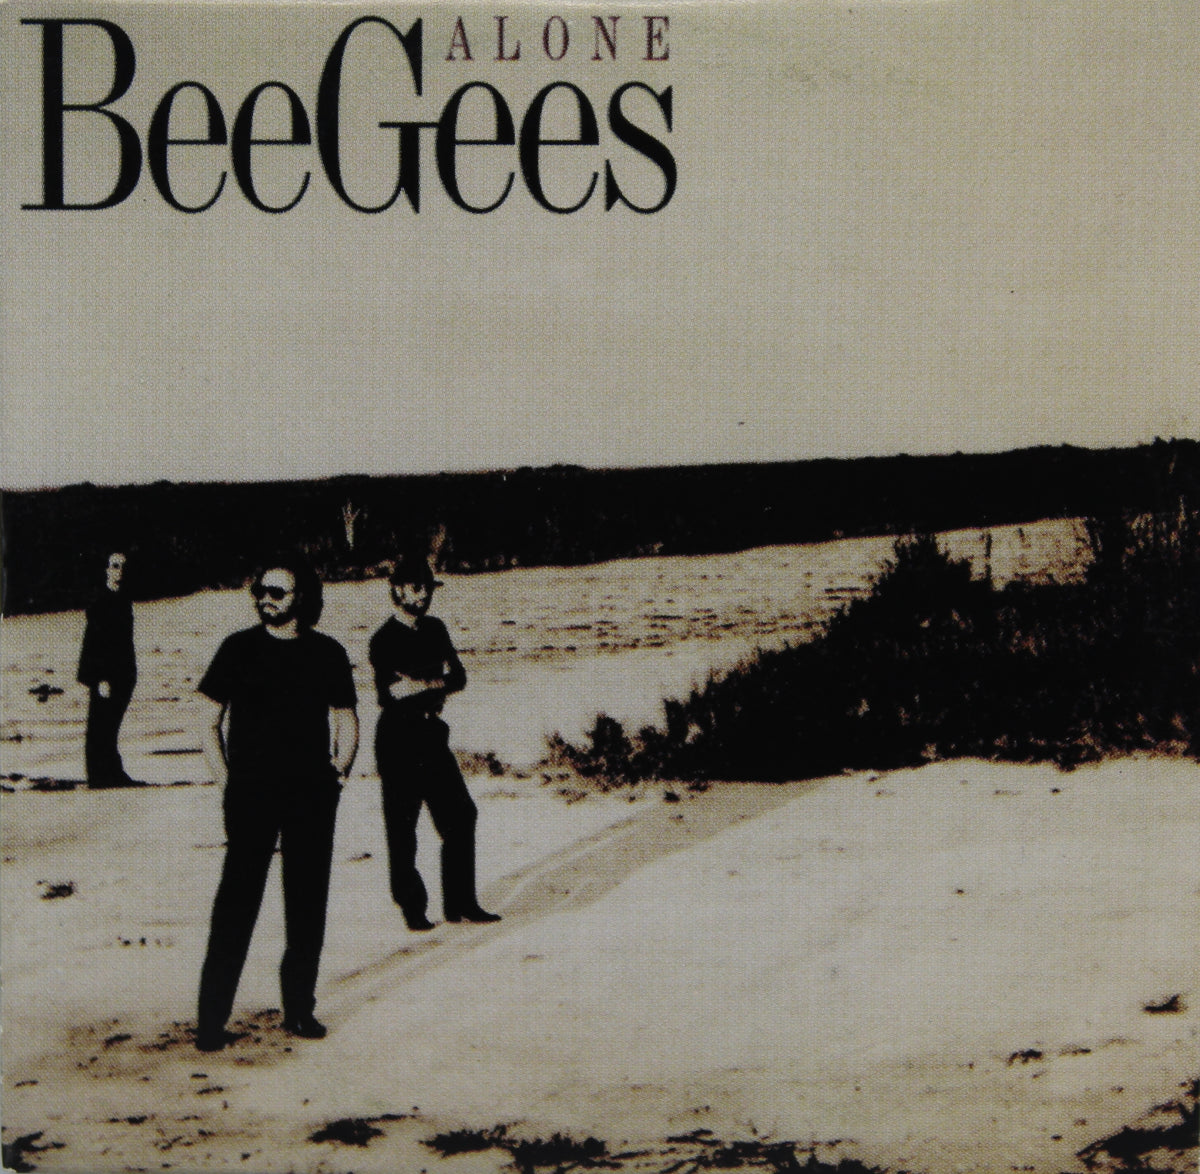 Bee Gees – Alone, CD, Single, Promo, Mexico 1997